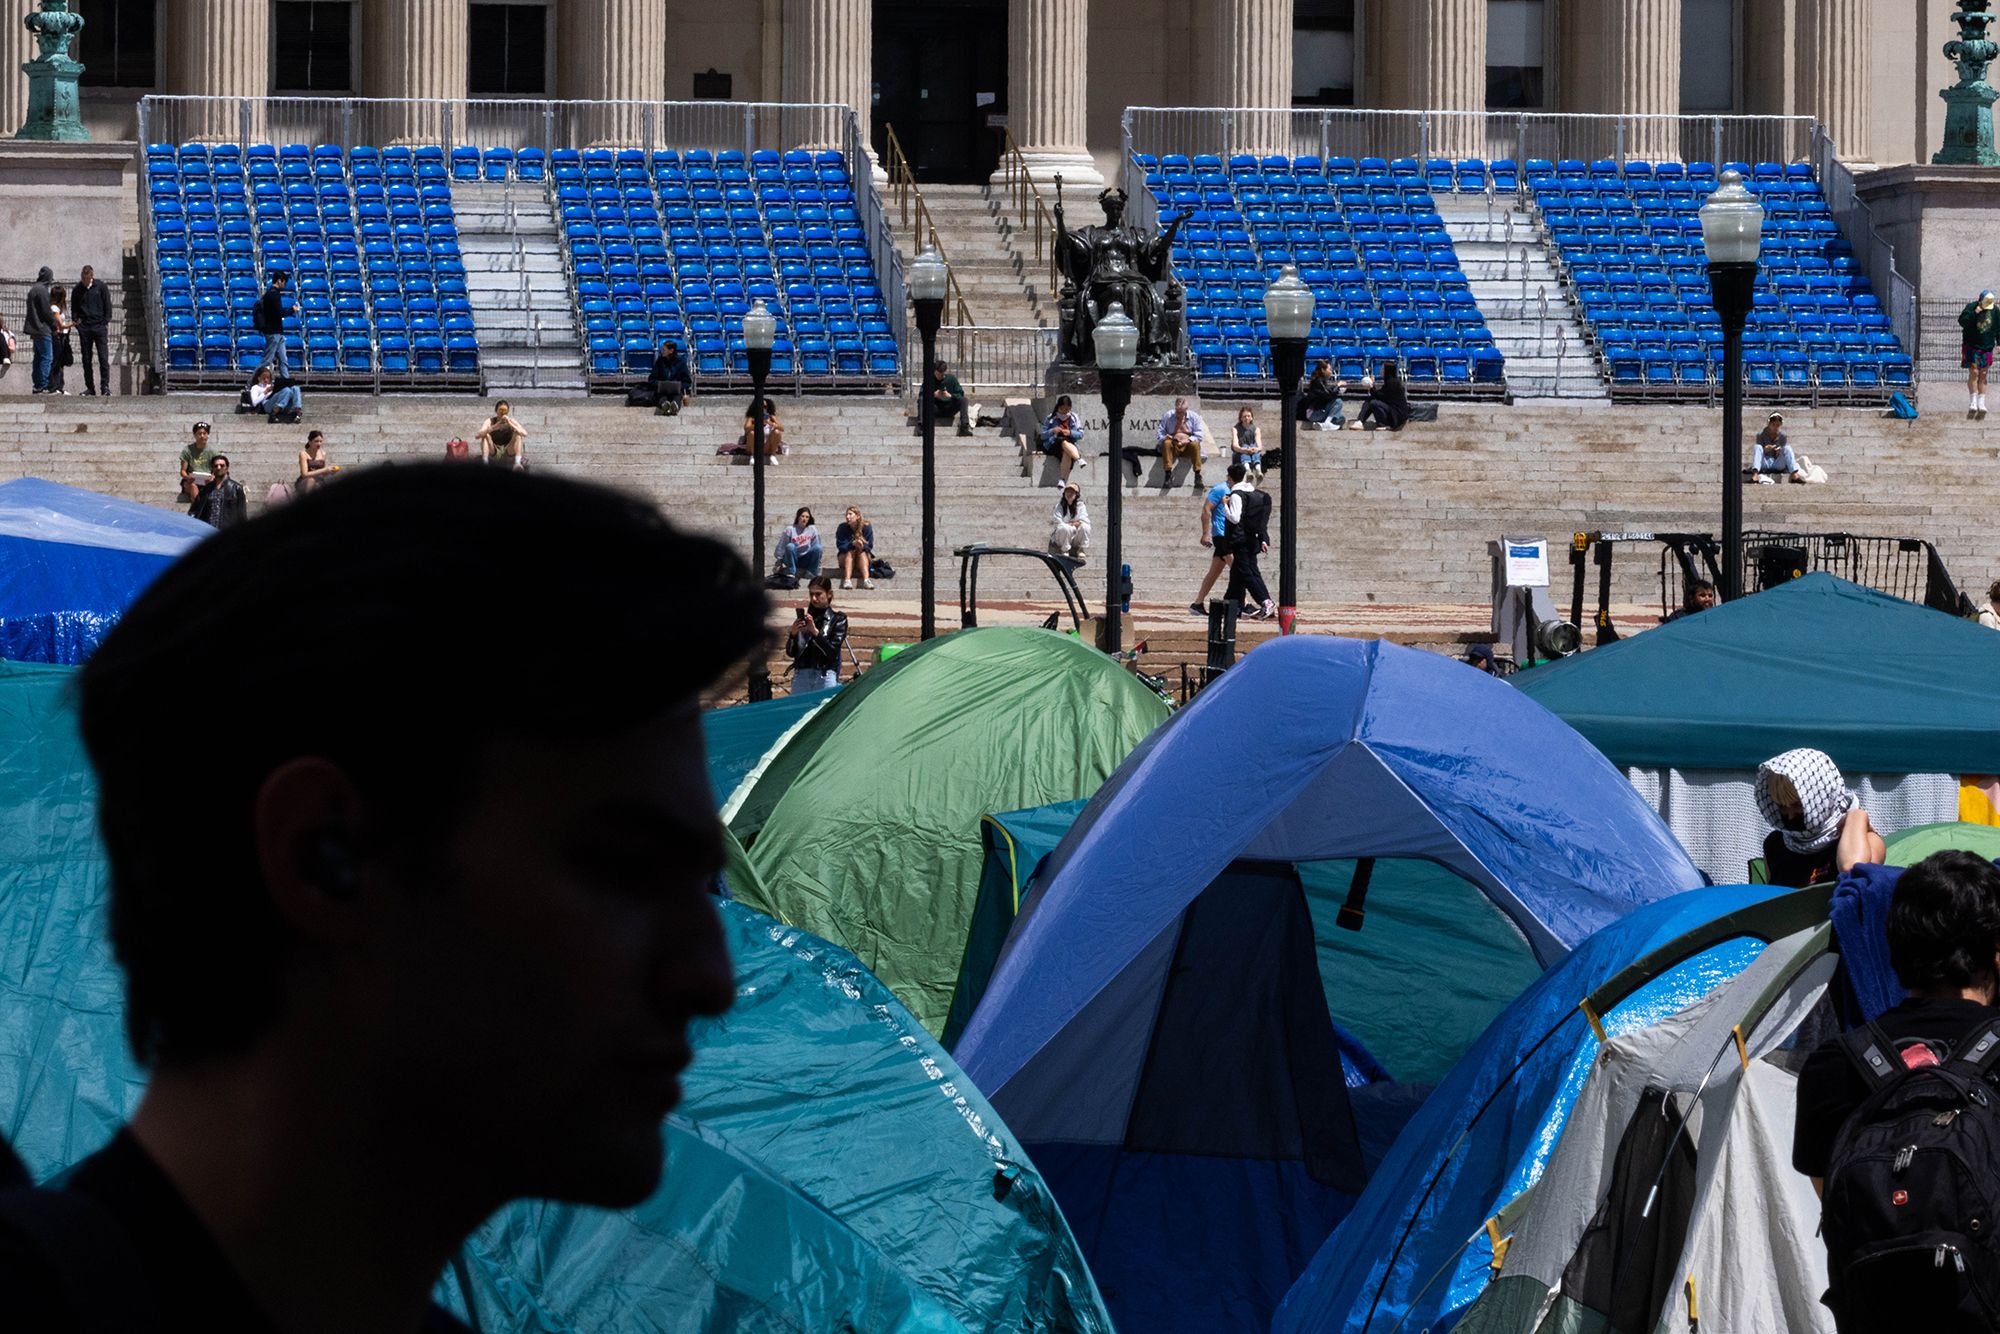 Demonstrators' tents are set up on Columbia's campus in New York on April 24. The school is also preparing for graduation ceremonies.